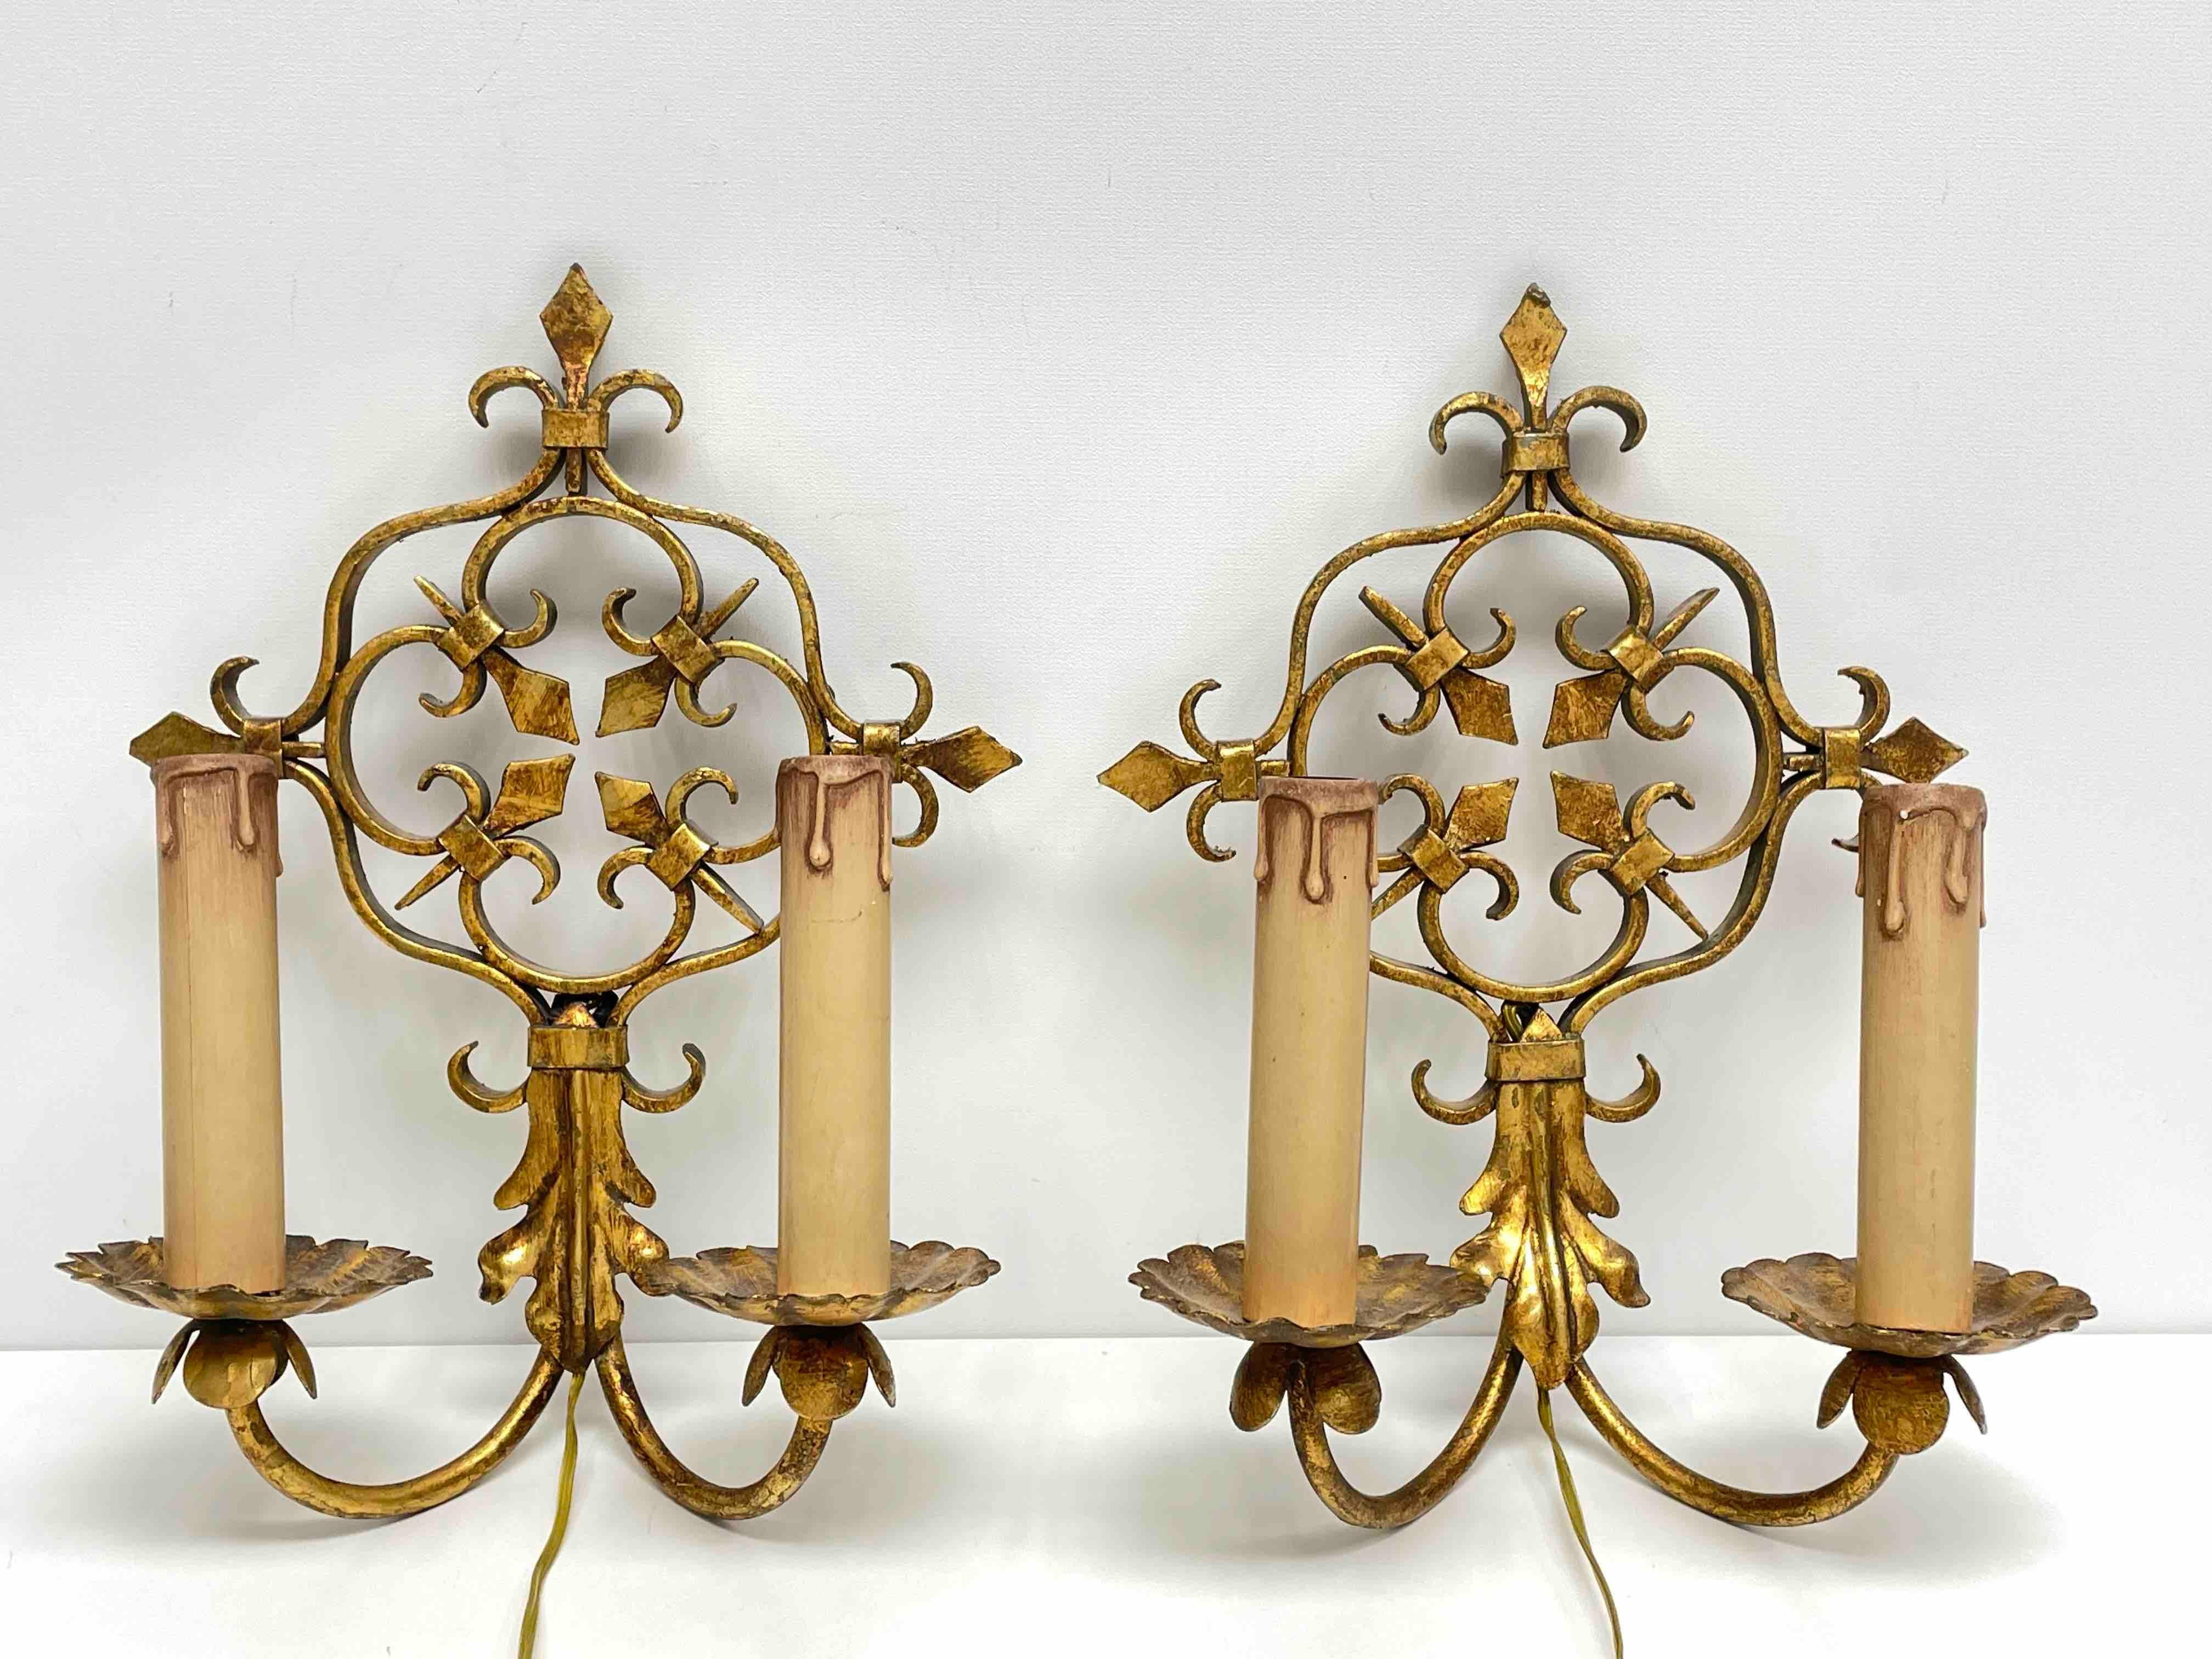 Hollywood Regency Pair of Gilt Metal Tole Toleware Sconces by Banci Firenze, Italy, 1960s For Sale